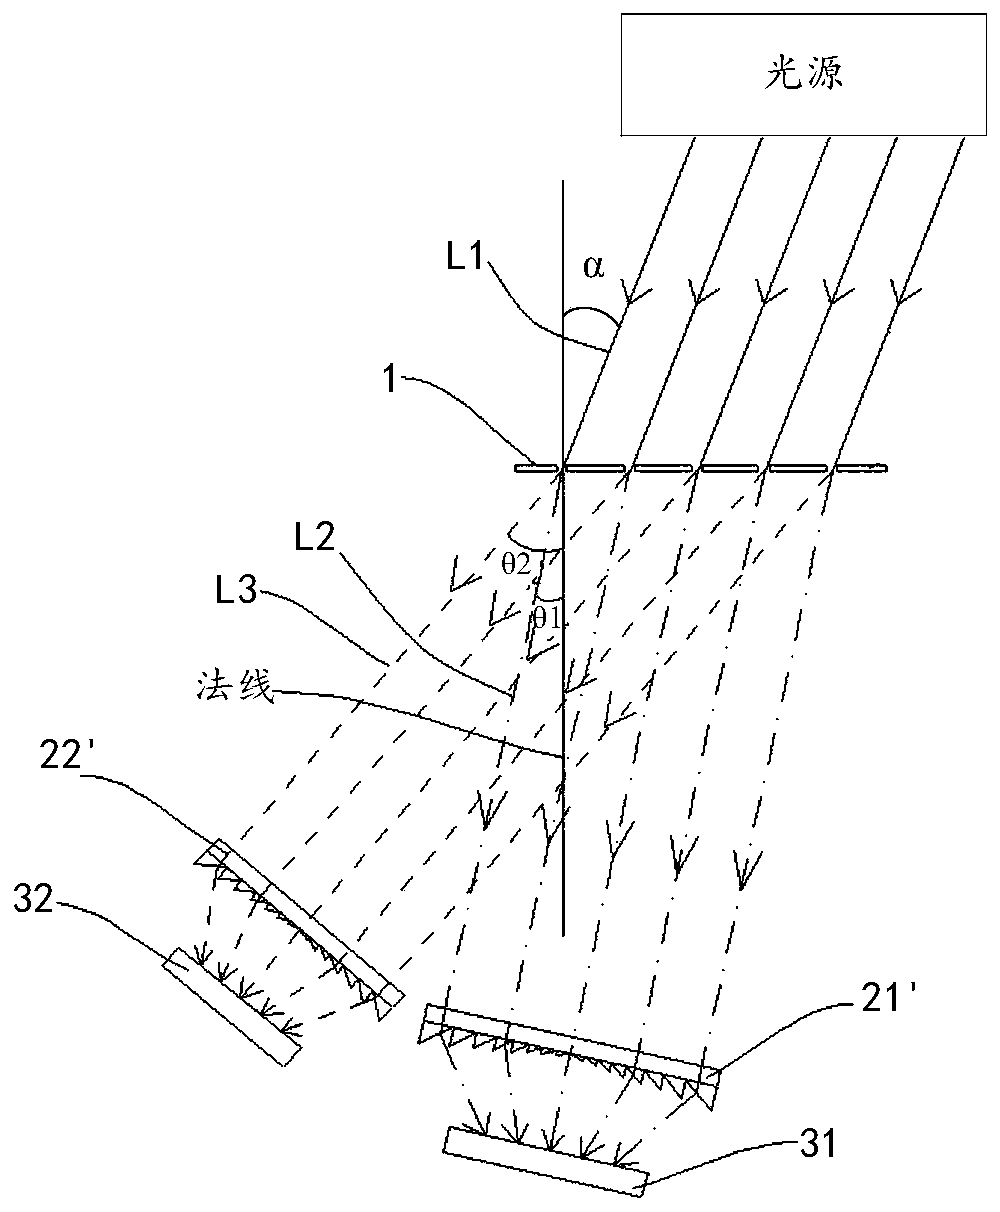 Concentrating photovoltaic system based on beam splitting element